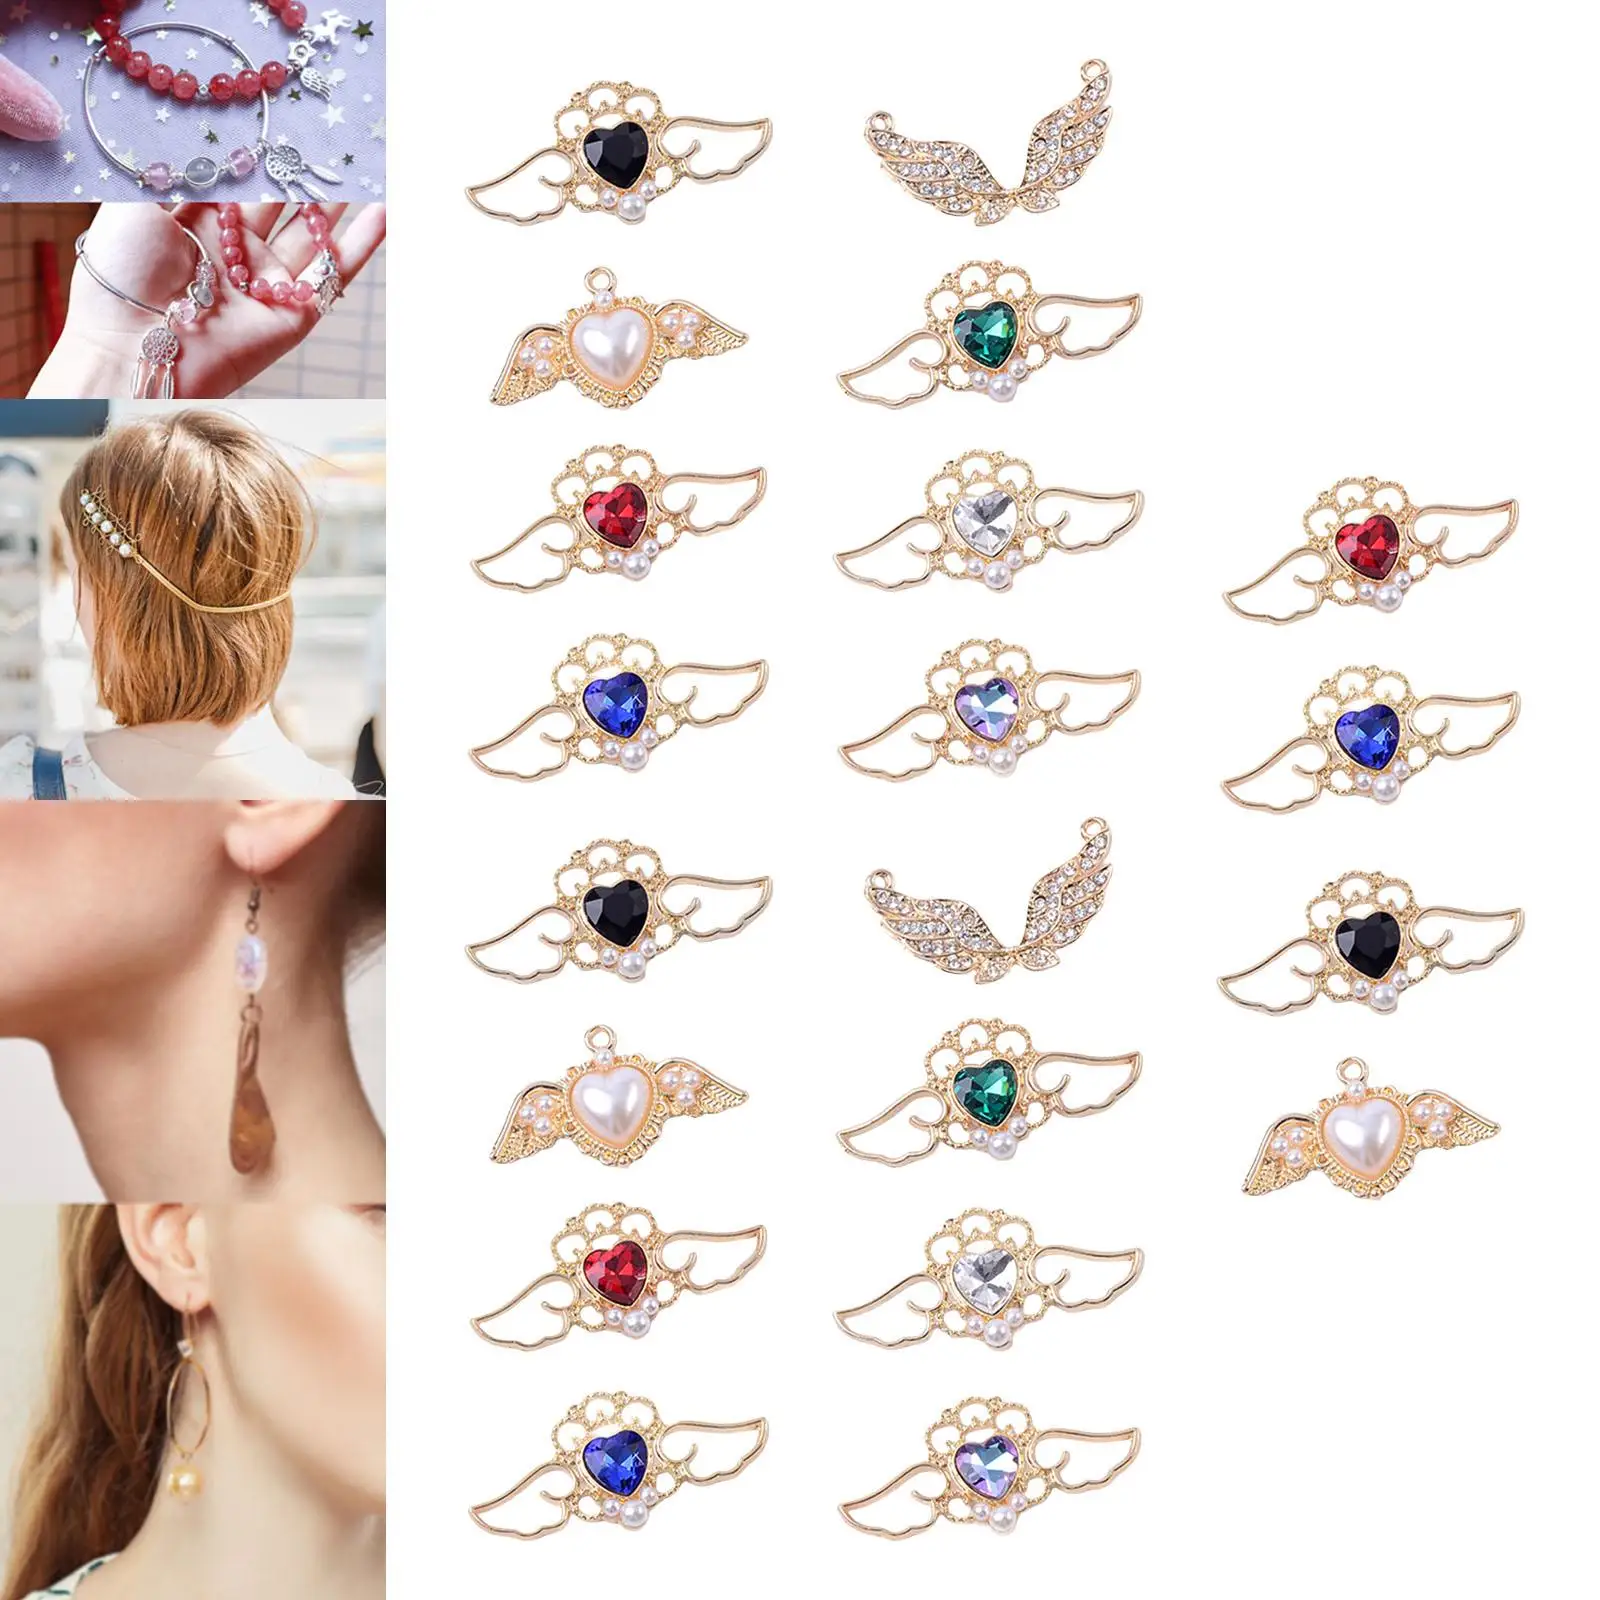 Mix 20Pcs/Pack Heart wings Shape Charms Alloy Pendants for Jewellery Making Bracelet Keychains Hanging Accessories Necklace